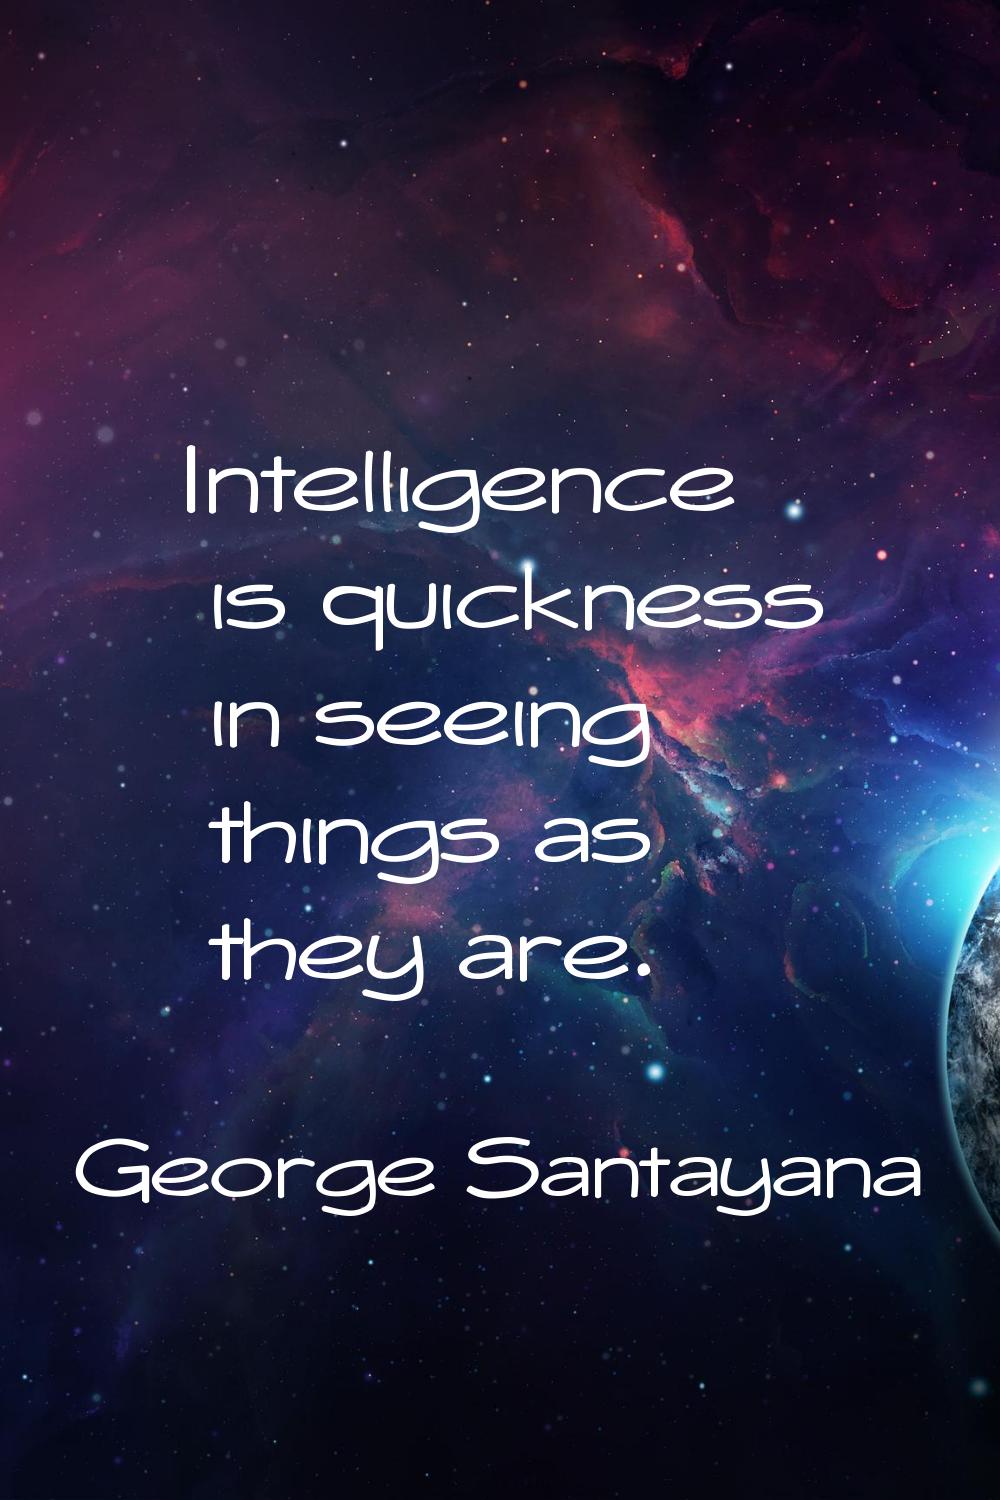 Intelligence is quickness in seeing things as they are.